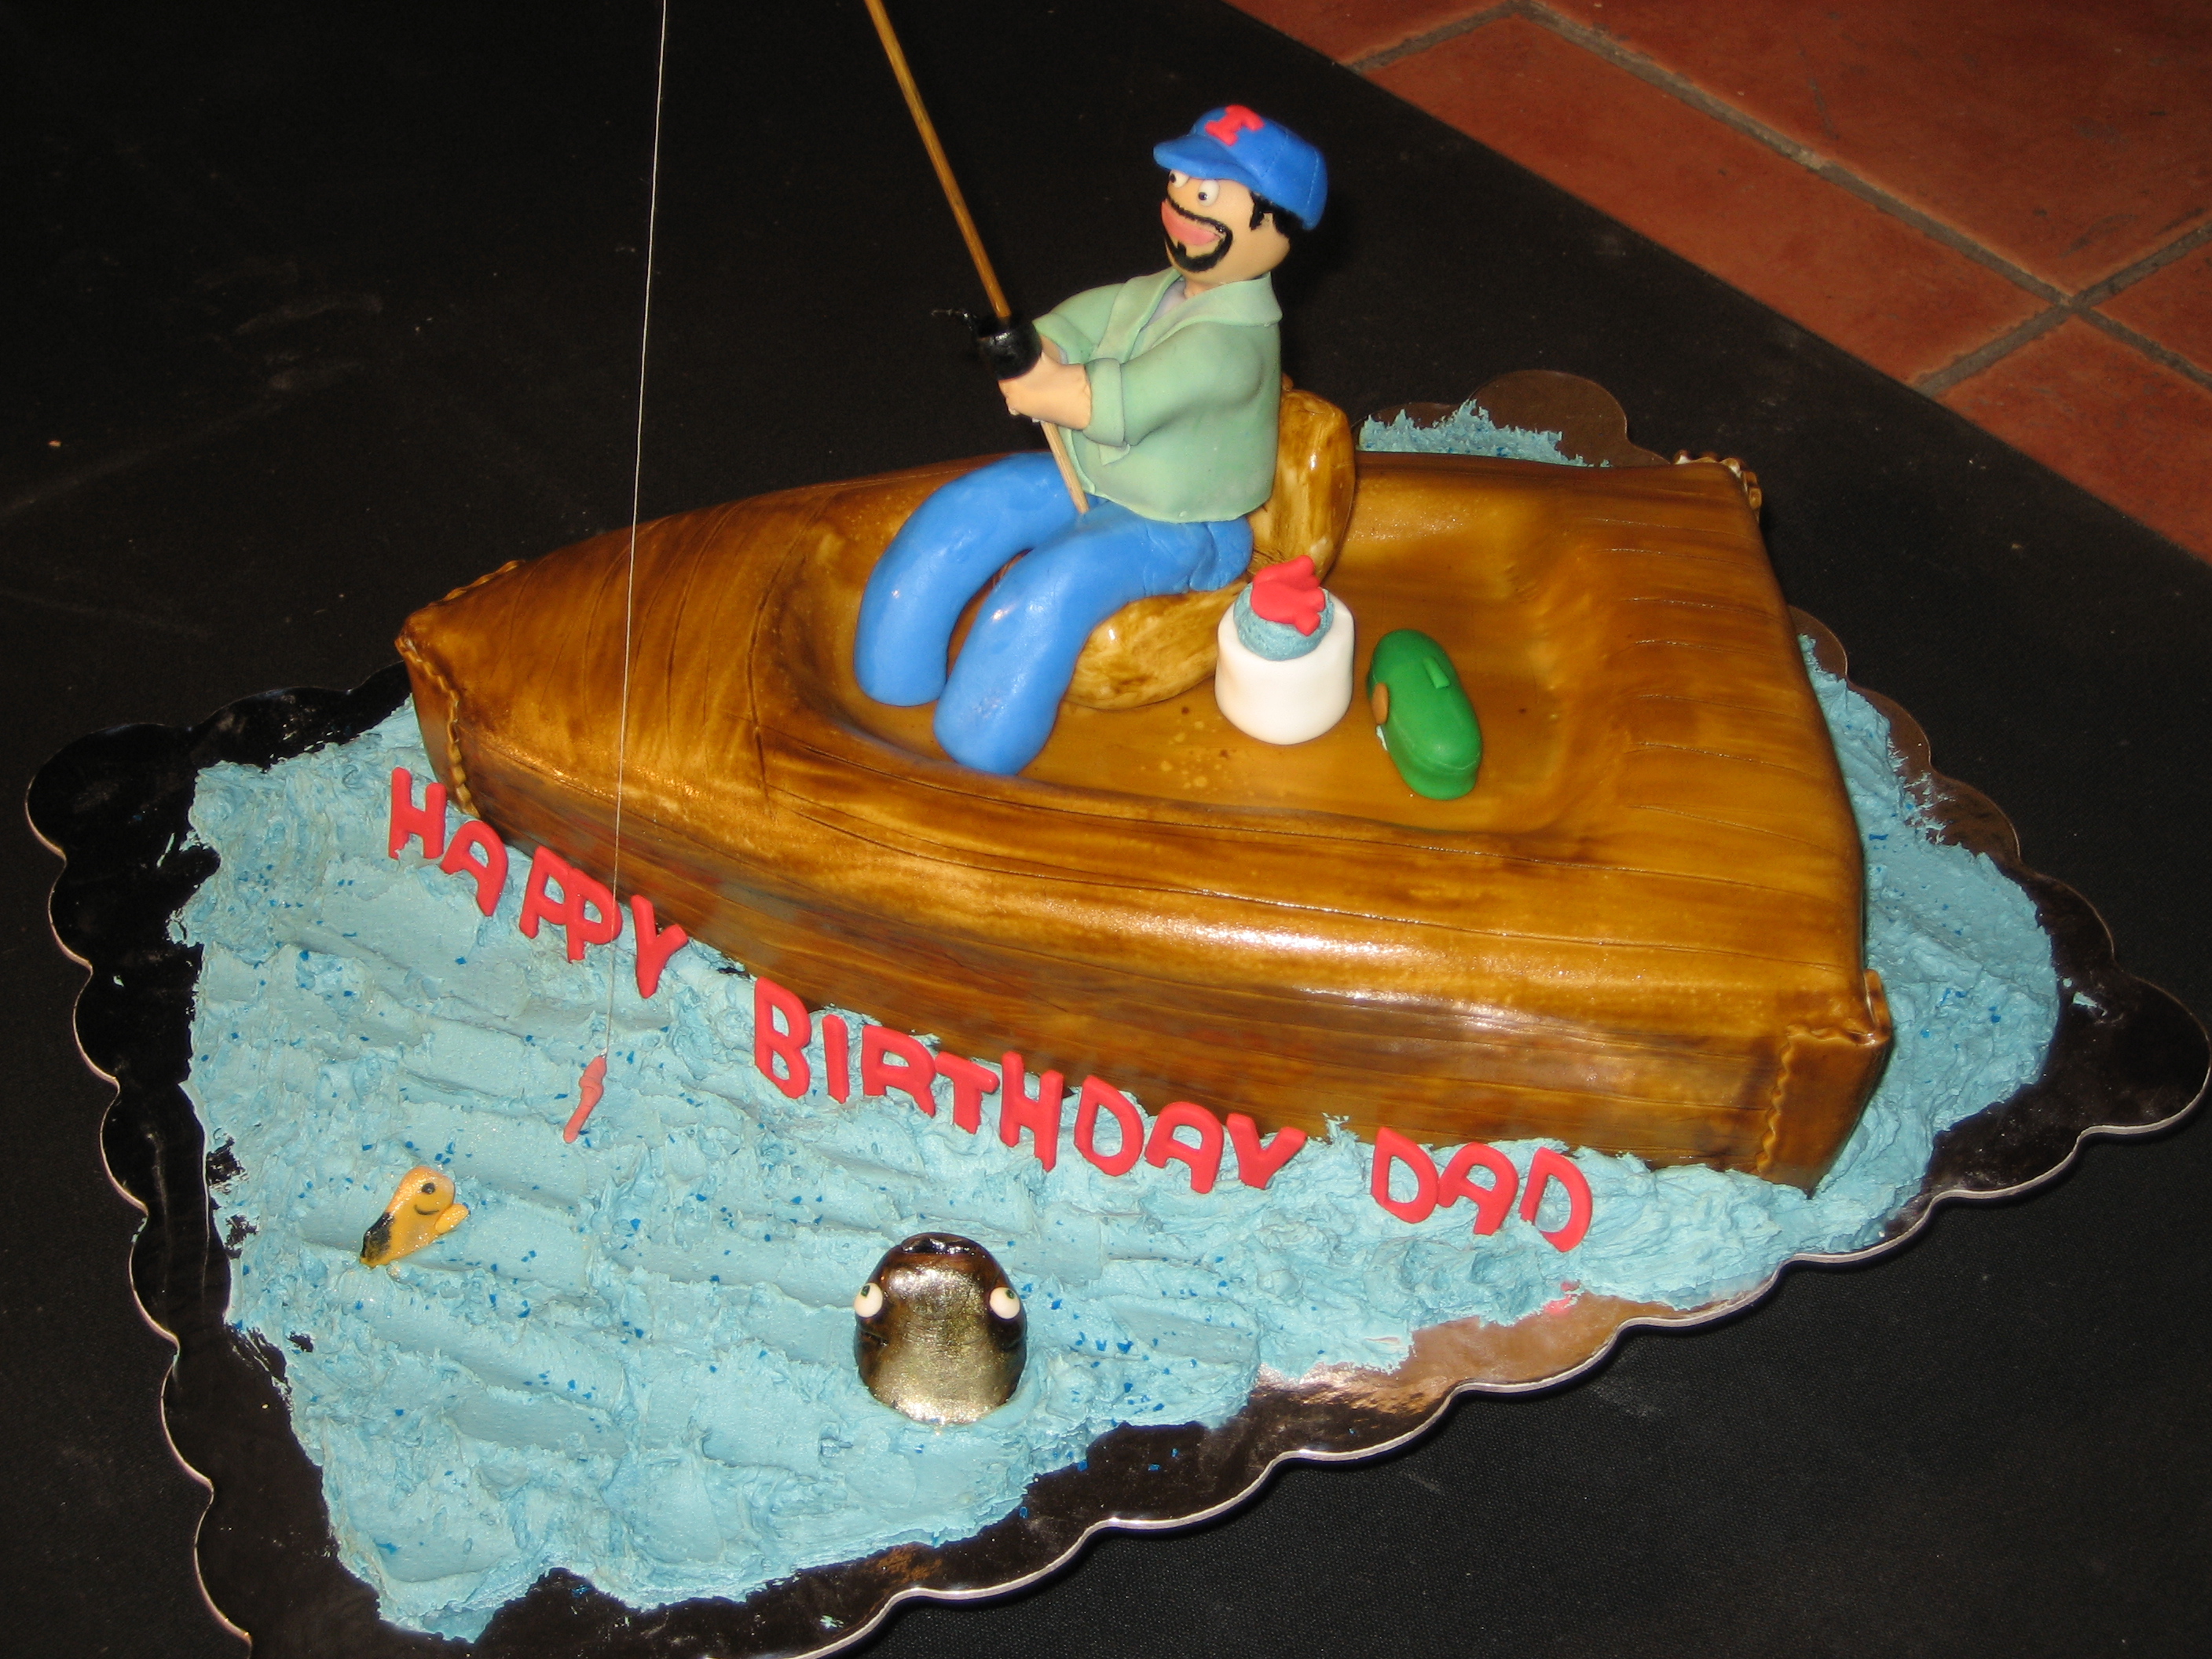 dad’s fishing boat cakes by dana